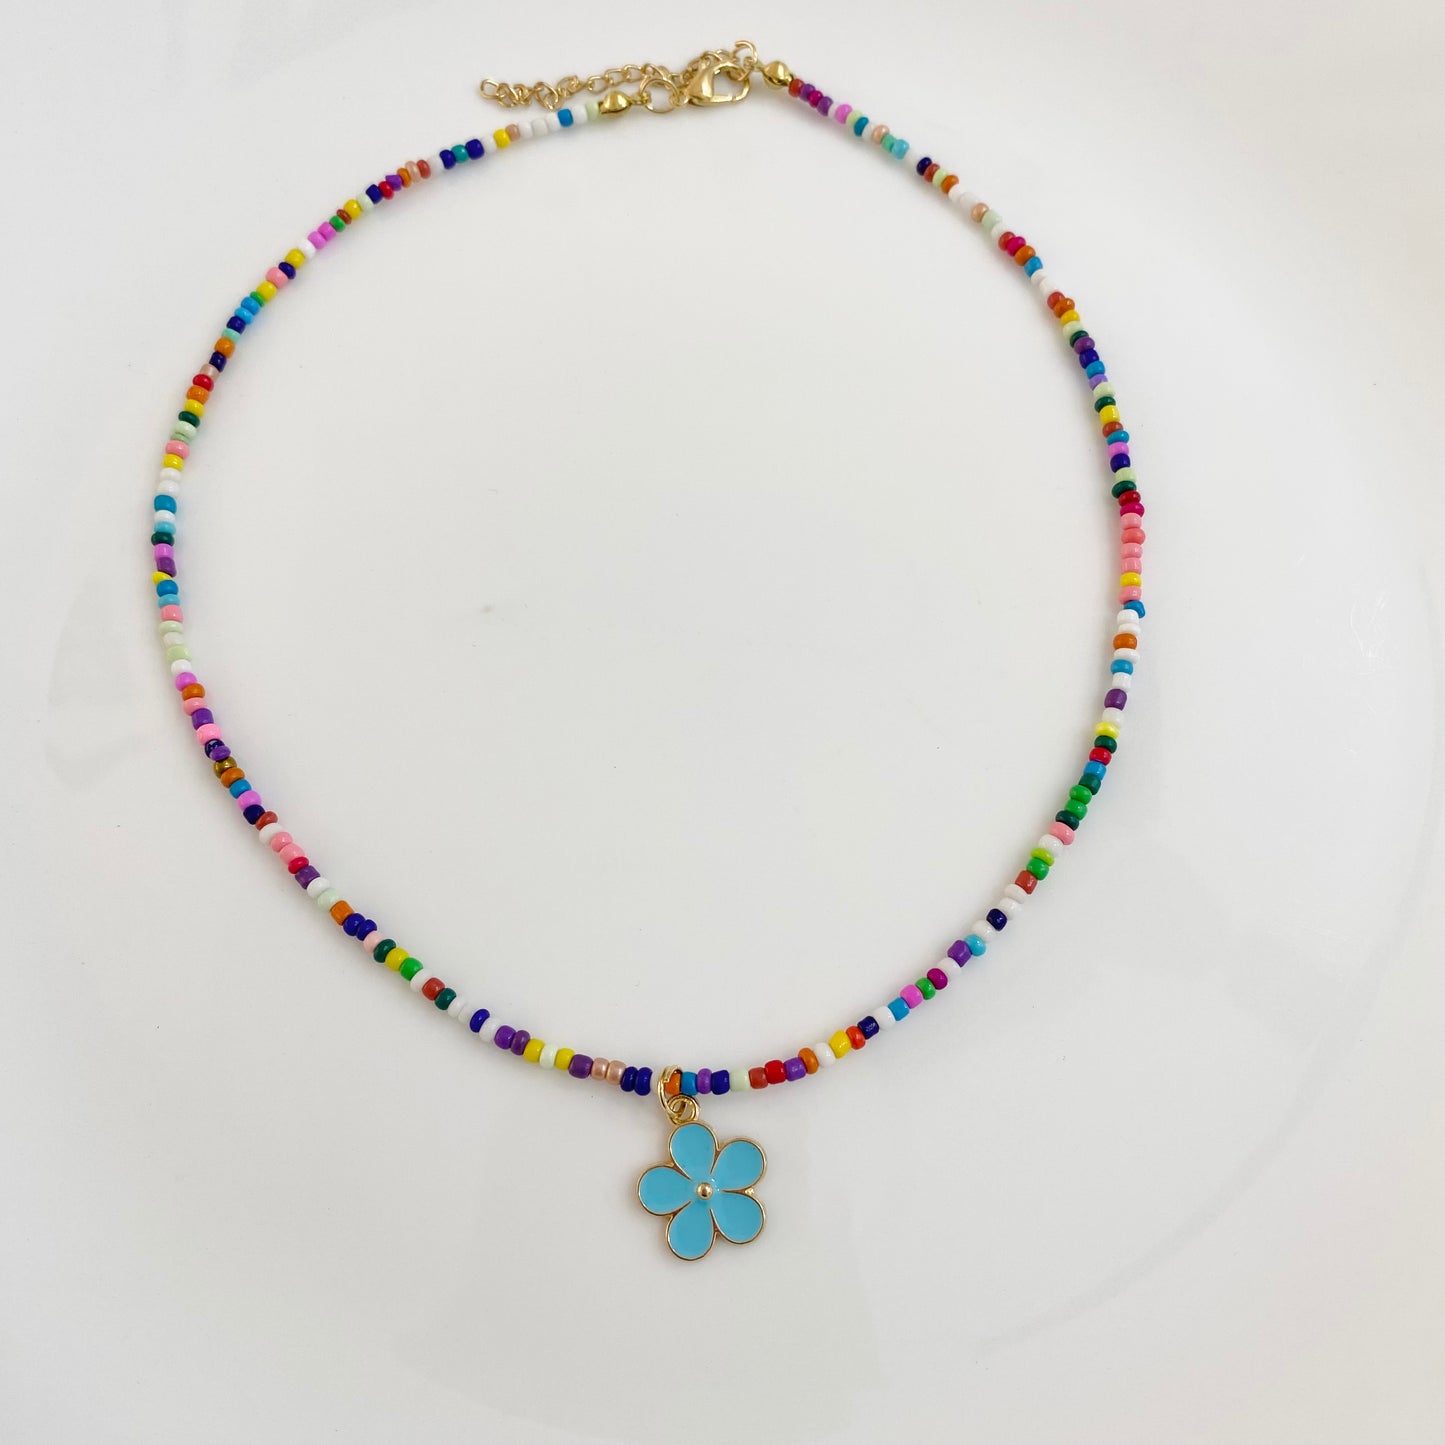 Small Flower beads necklace